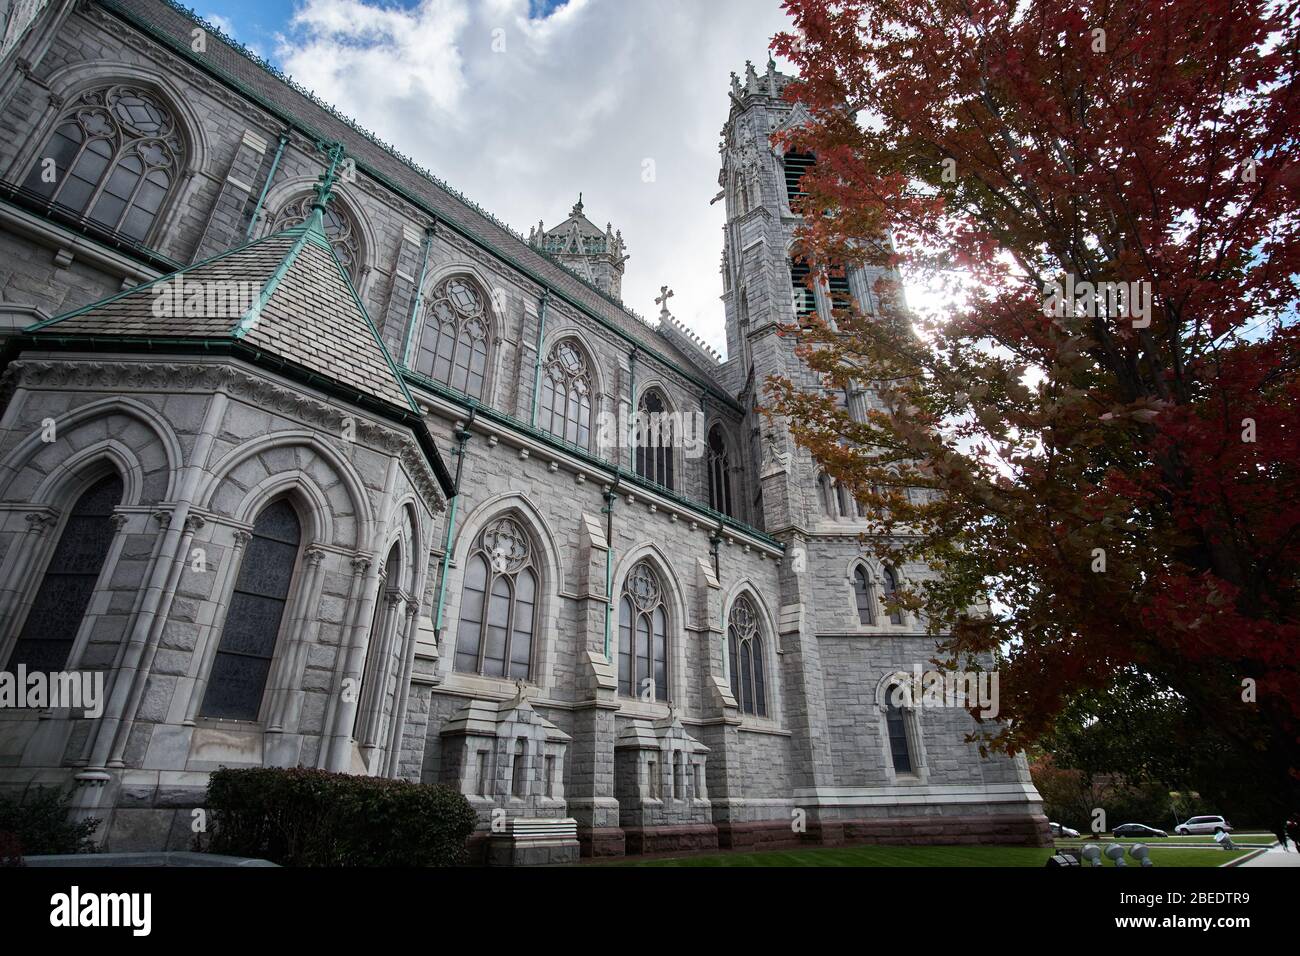 Exterior view of the Cathedral Basilica of the Sacred Heart cathedral in Newark New Jersey, USA. Photo taken in Autumn. Stock Photo